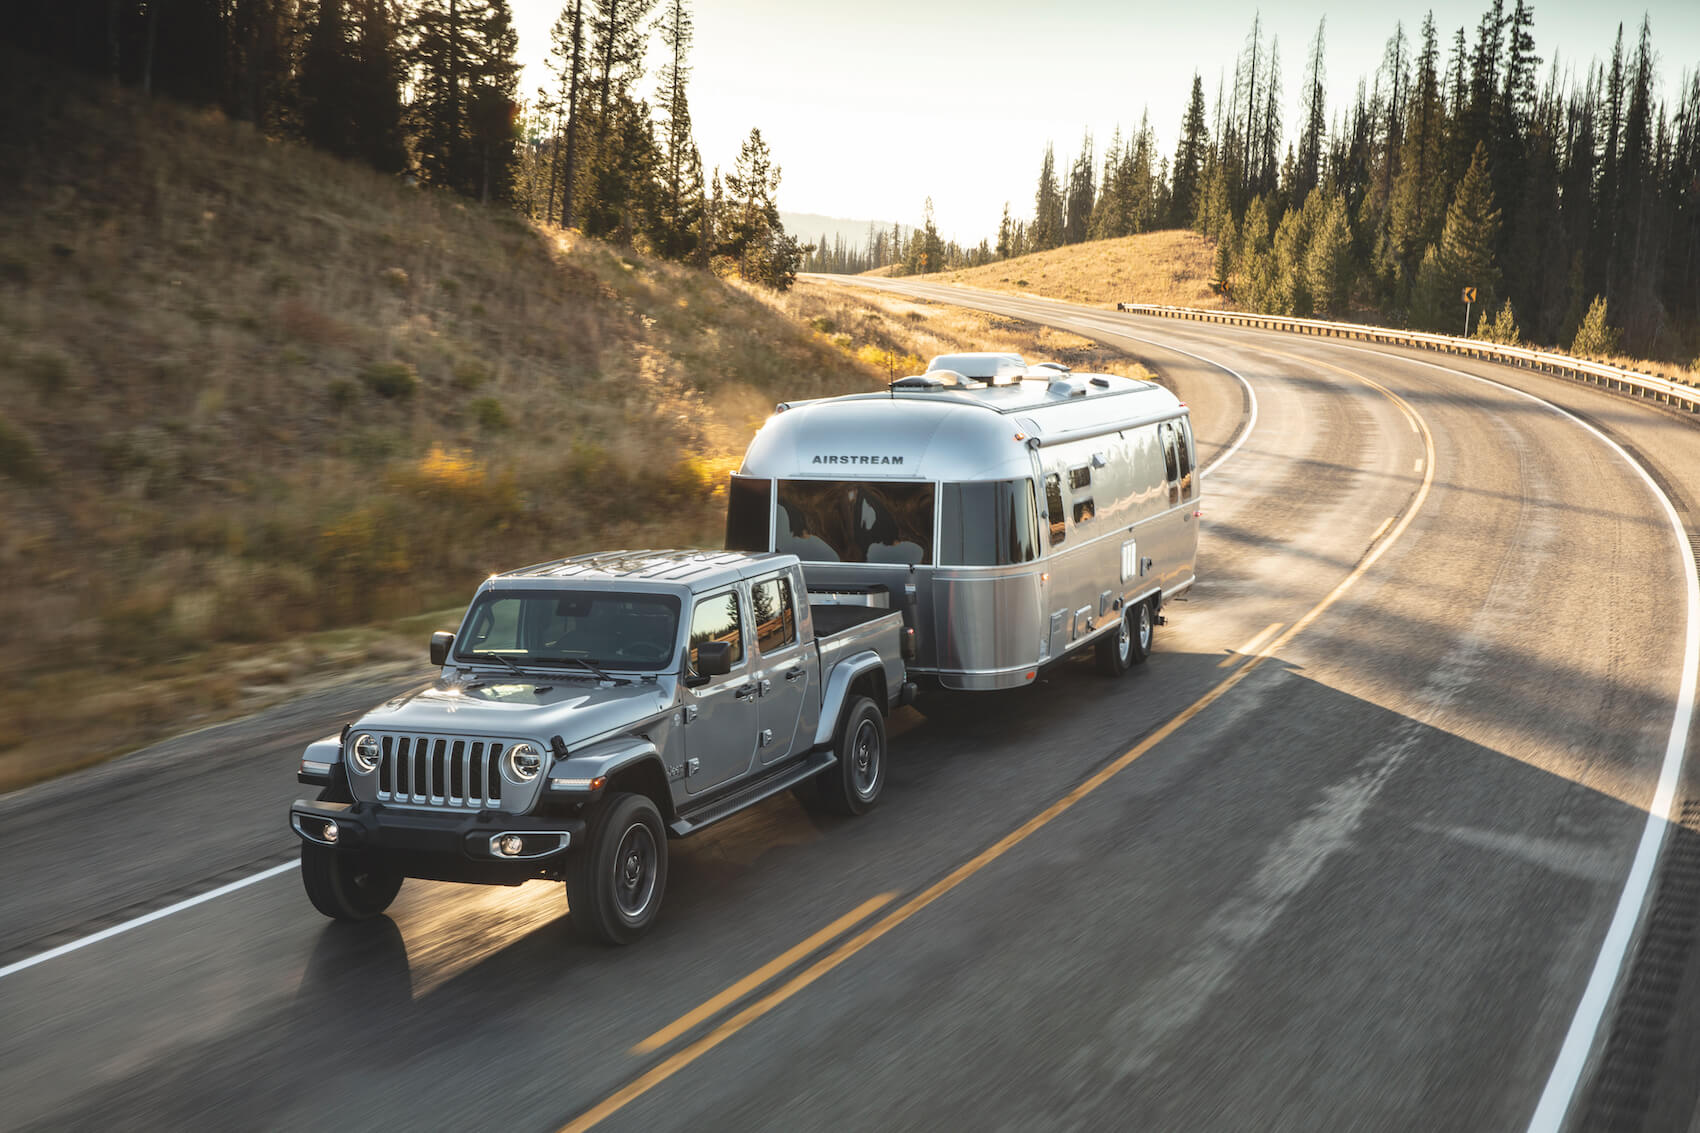 2021 Jeep Gladiator towing capacity